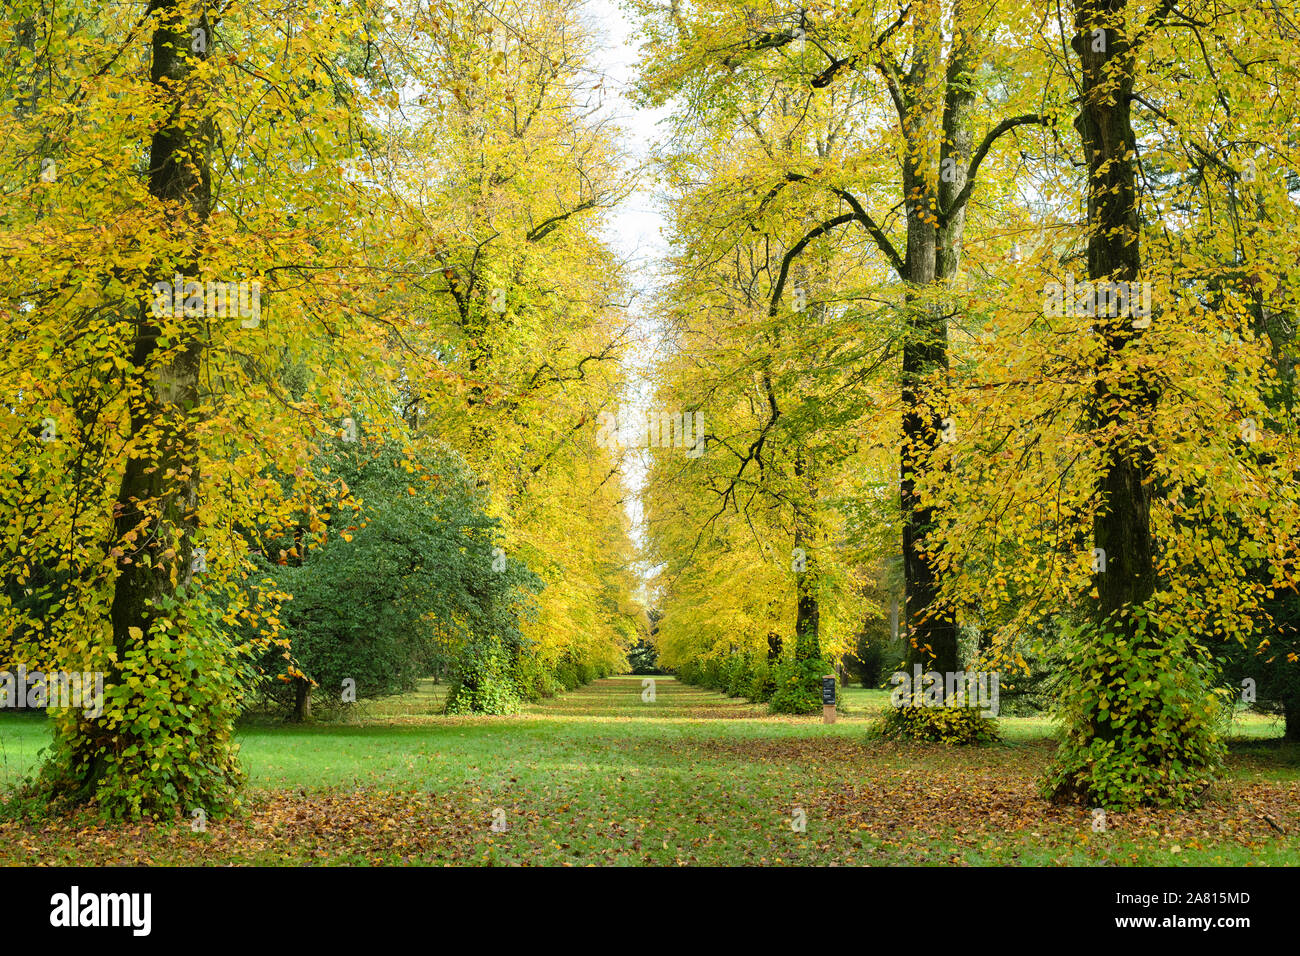 Lime avenue. Lime trees in autumn at Westonbirt Arboretum, Cotswolds, Gloucestershire, England Stock Photo